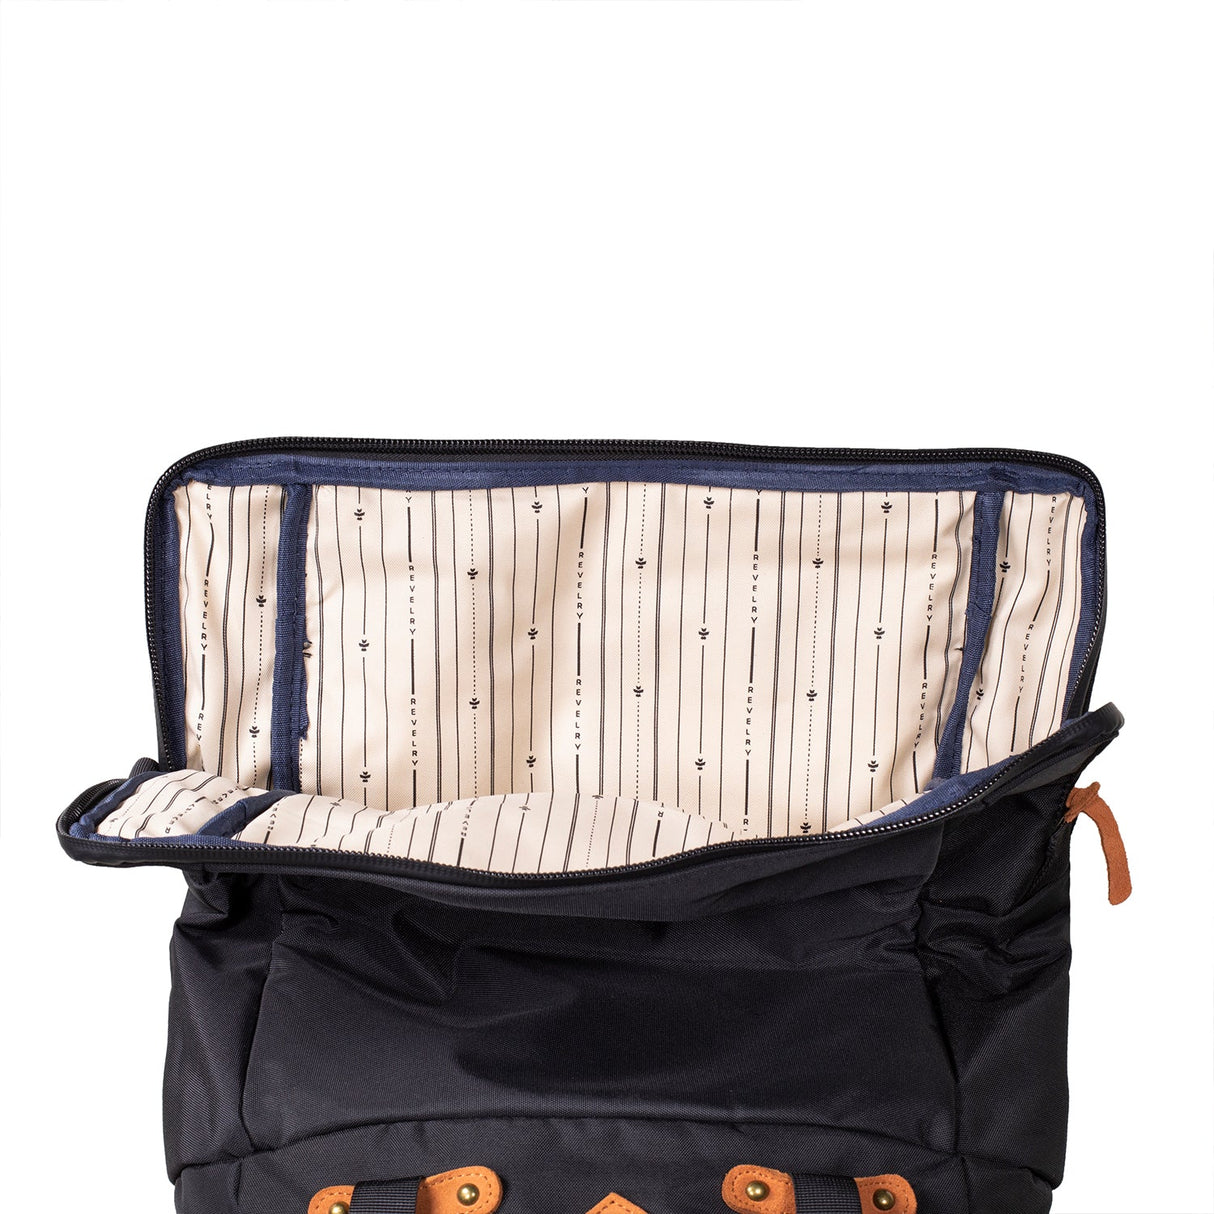 Revelry Supply The Drifter - Open Smell Proof Rolltop Backpack showing striped interior